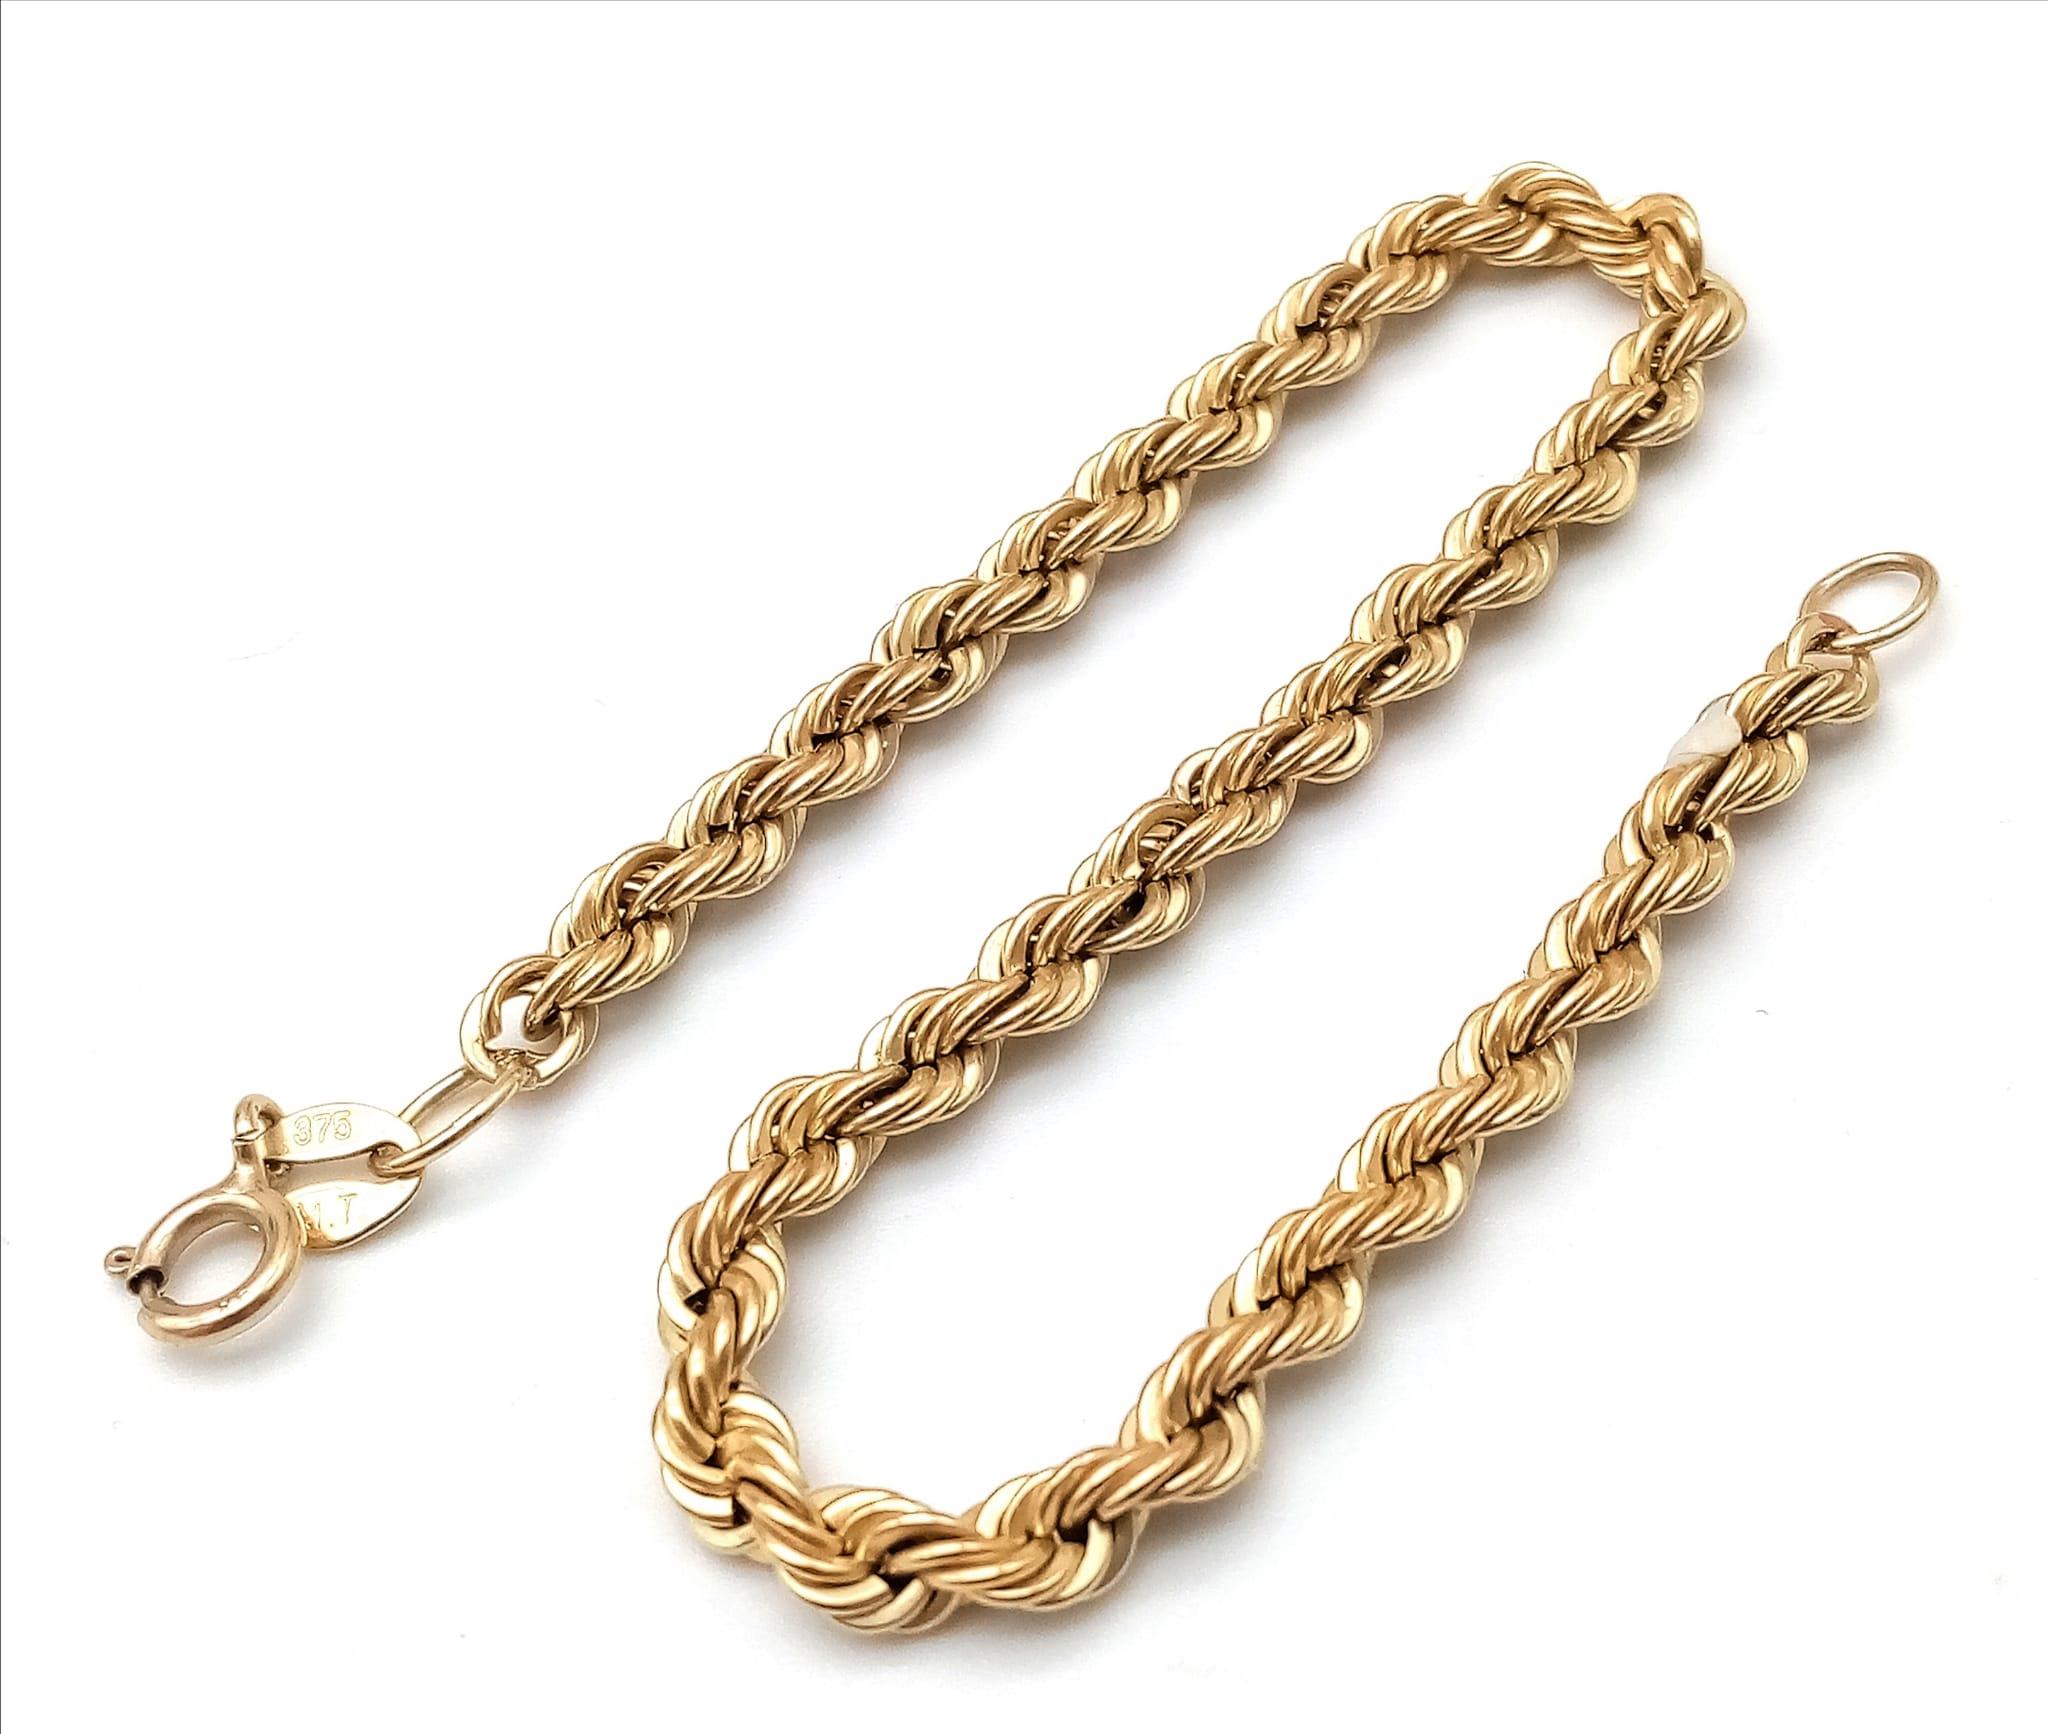 A 9K GOLD TWIST LINK 18cms BRACELET WITH A PAIR OF MATCHING TWIST EARRINGS . 3.3gms - Image 2 of 5